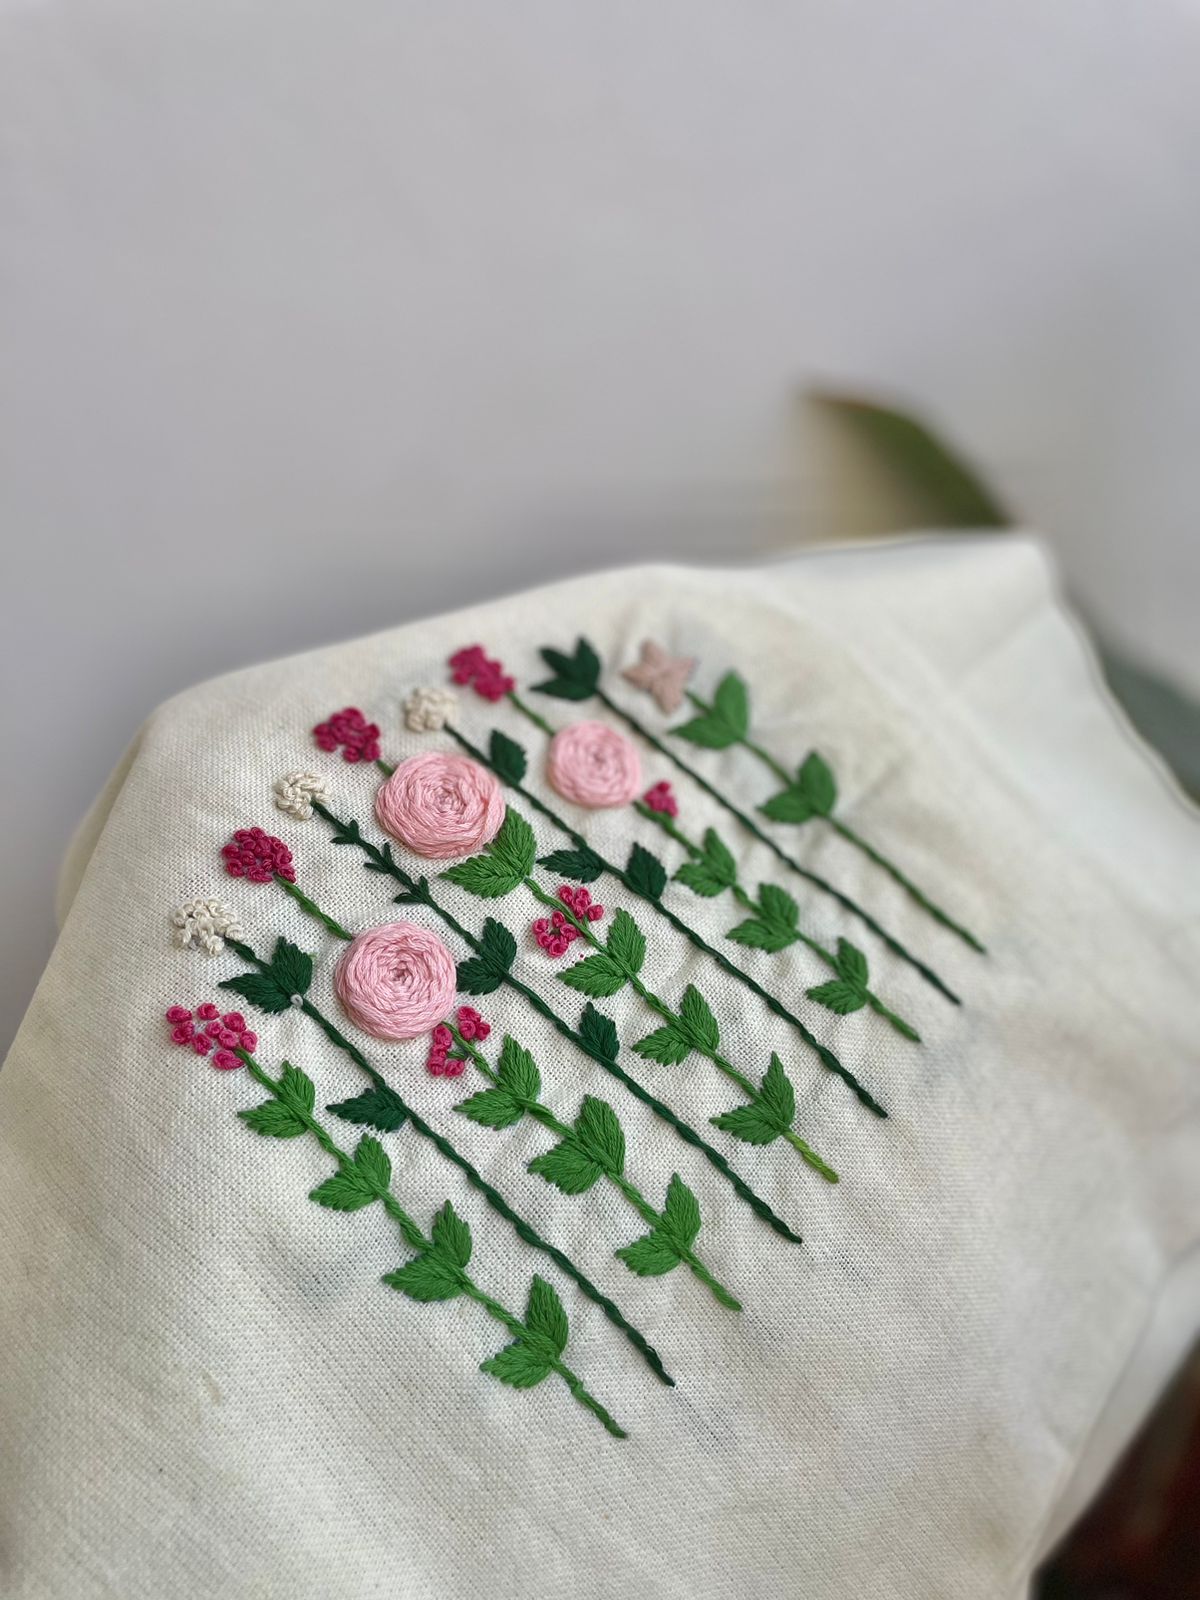 Embroidered Cream Floral Tote Bag